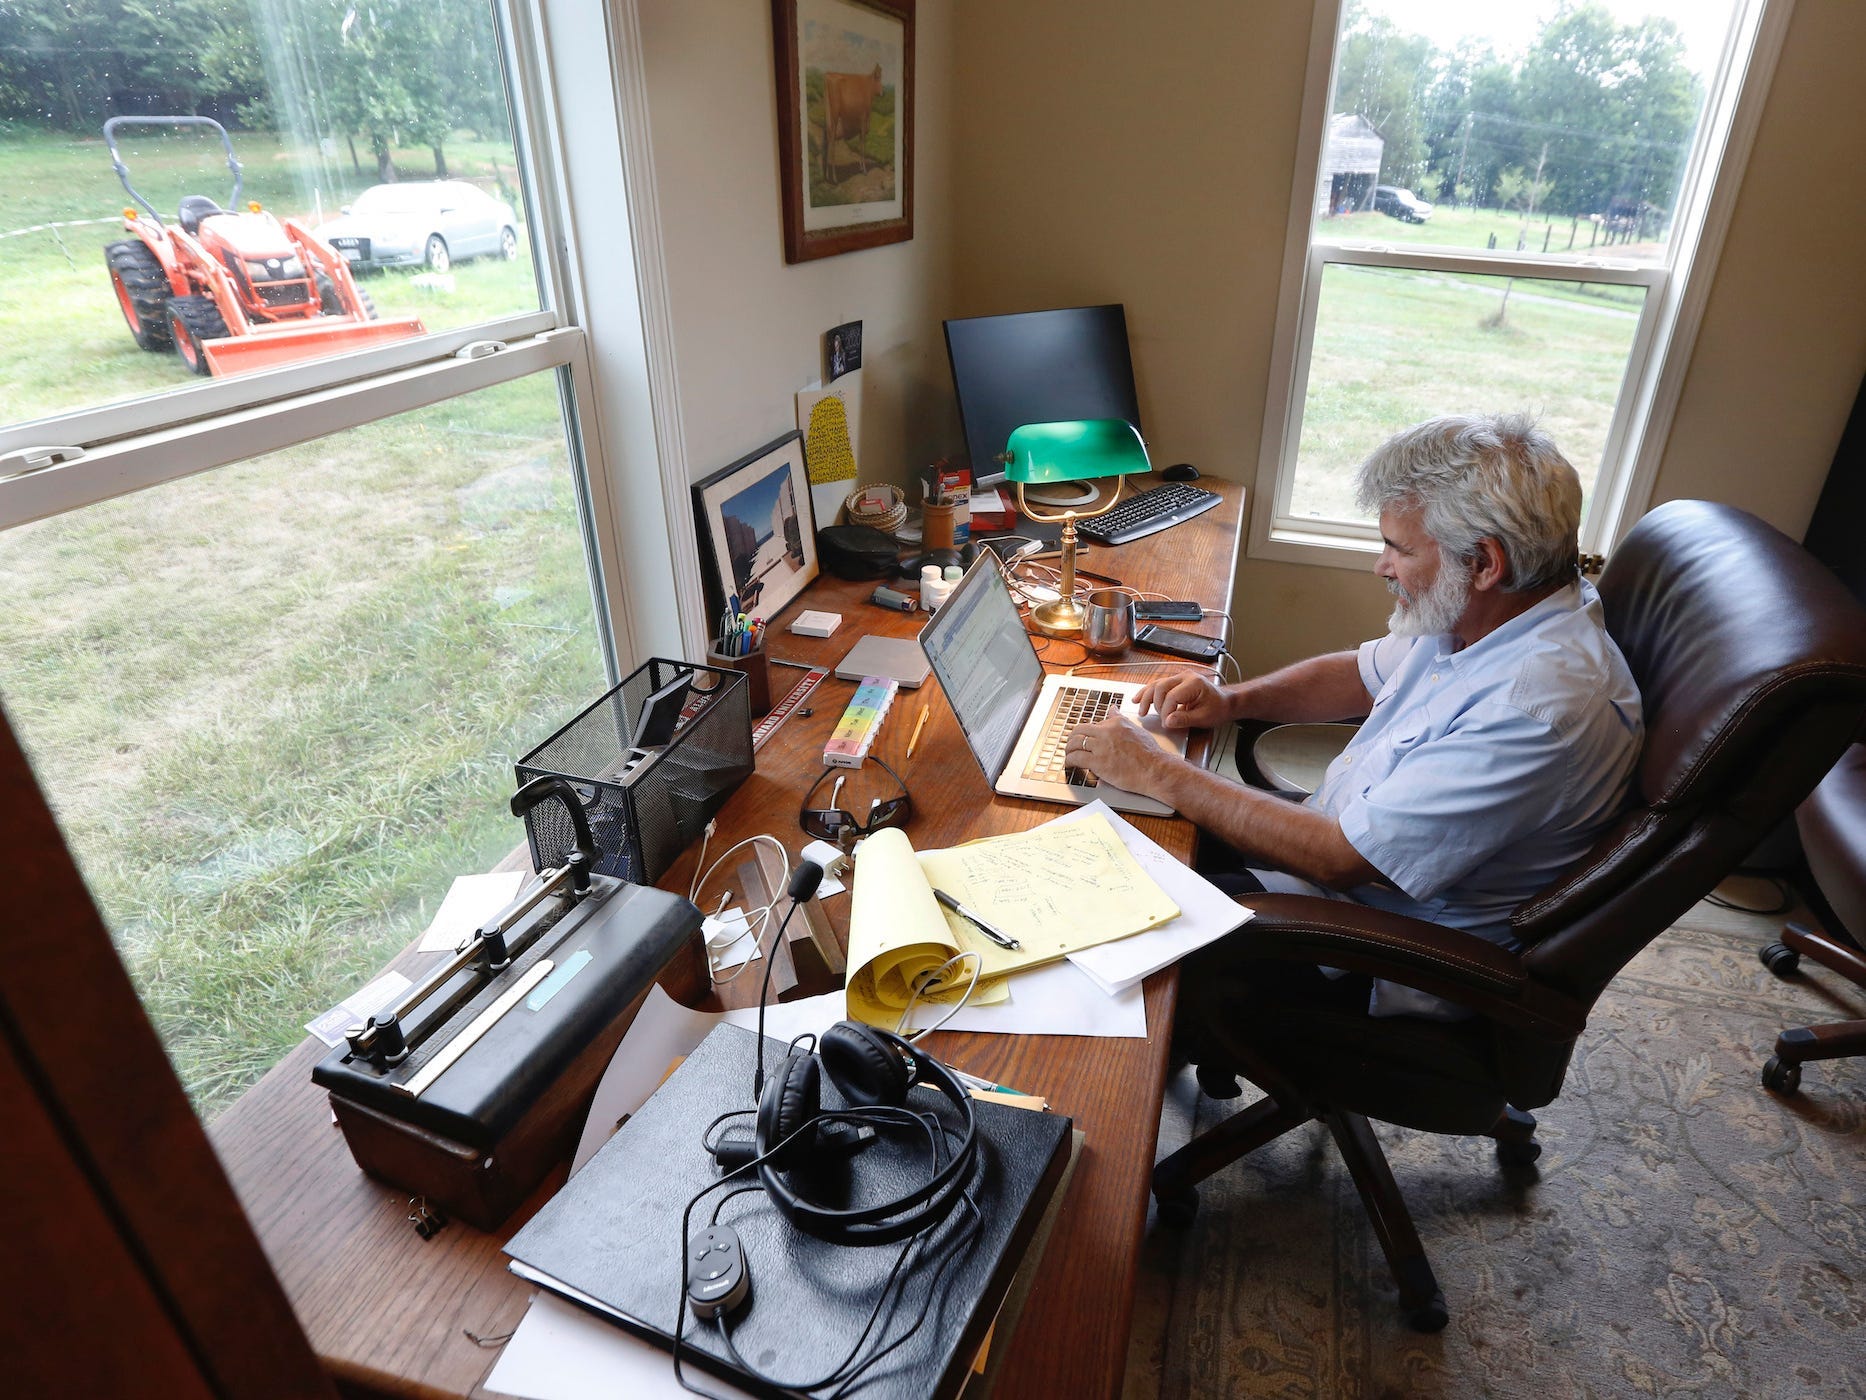 dr. robert malone working on his computer at his desk, farmland pictured out the window, with a tractor in view